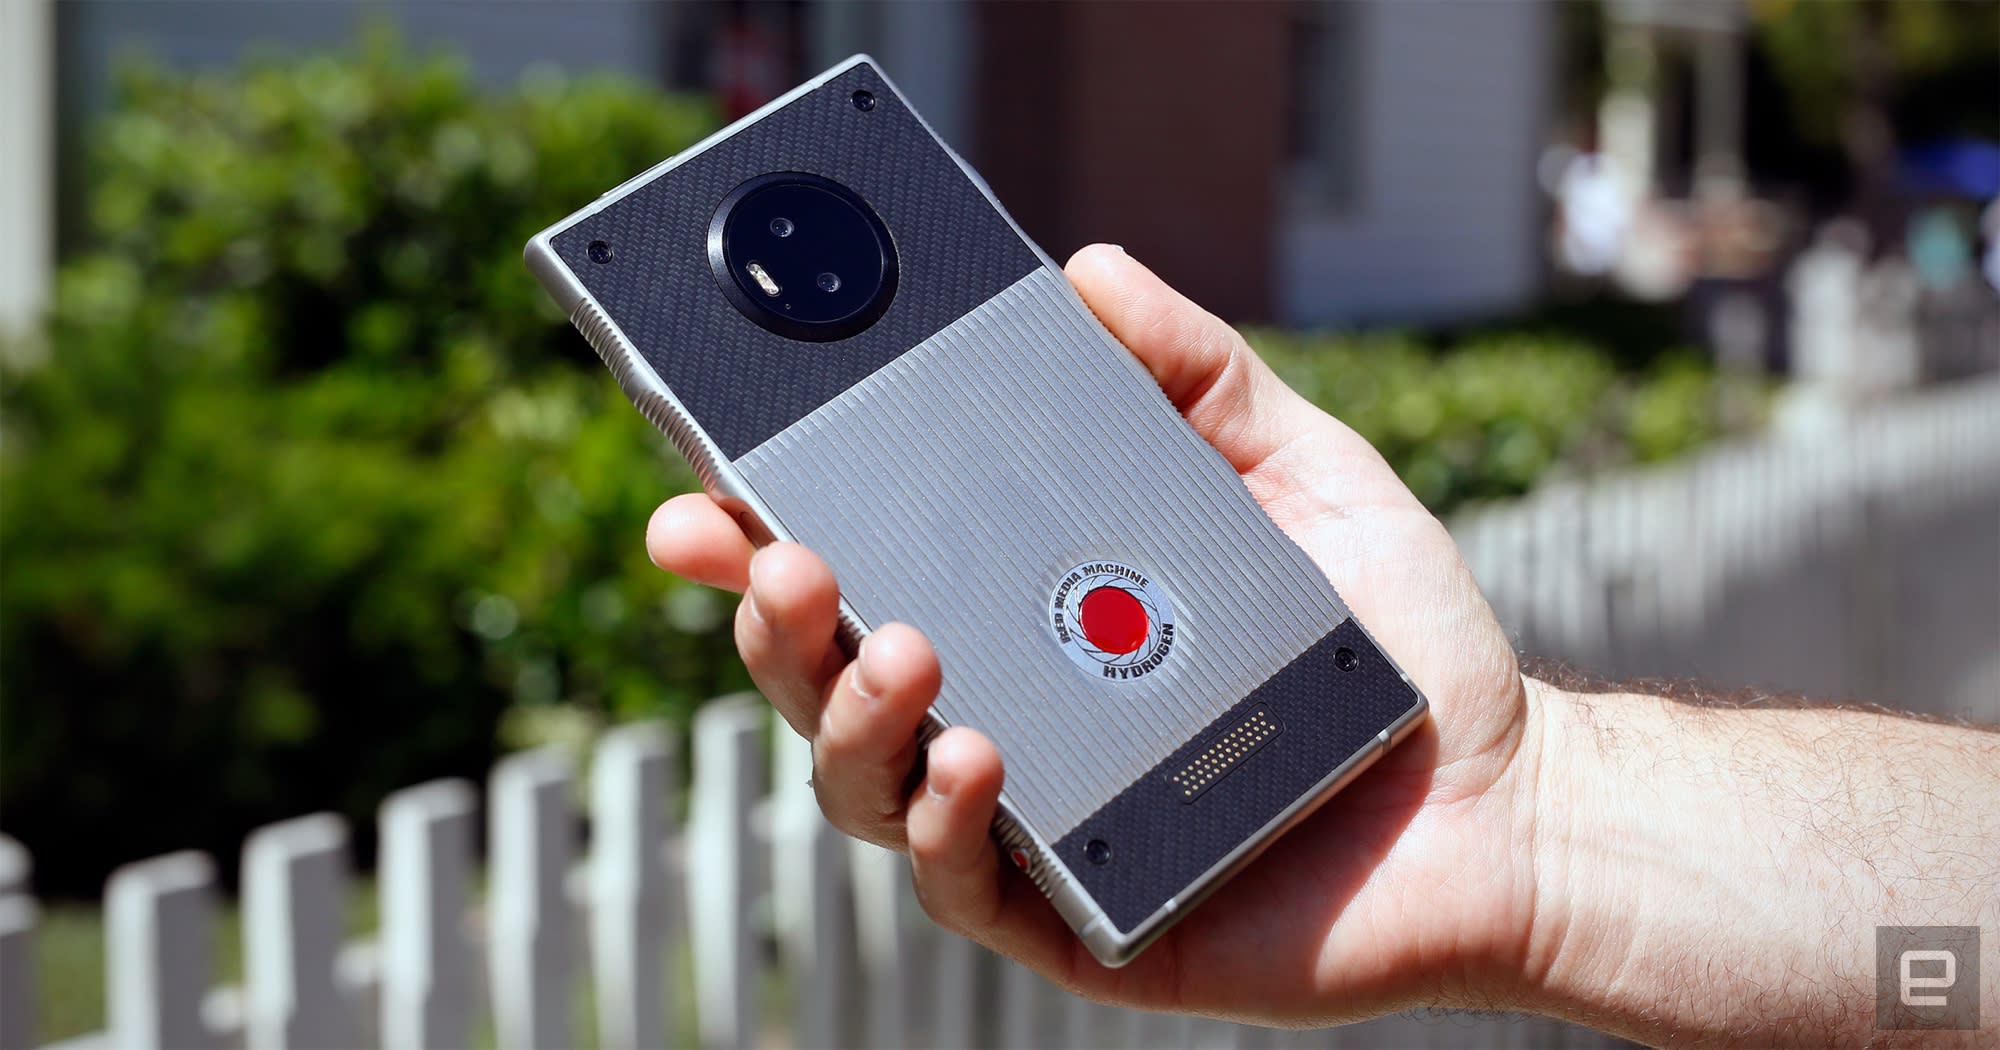 Indigenous metodologi Fortryd A closer look at RED's audacious Hydrogen One phone | Engadget